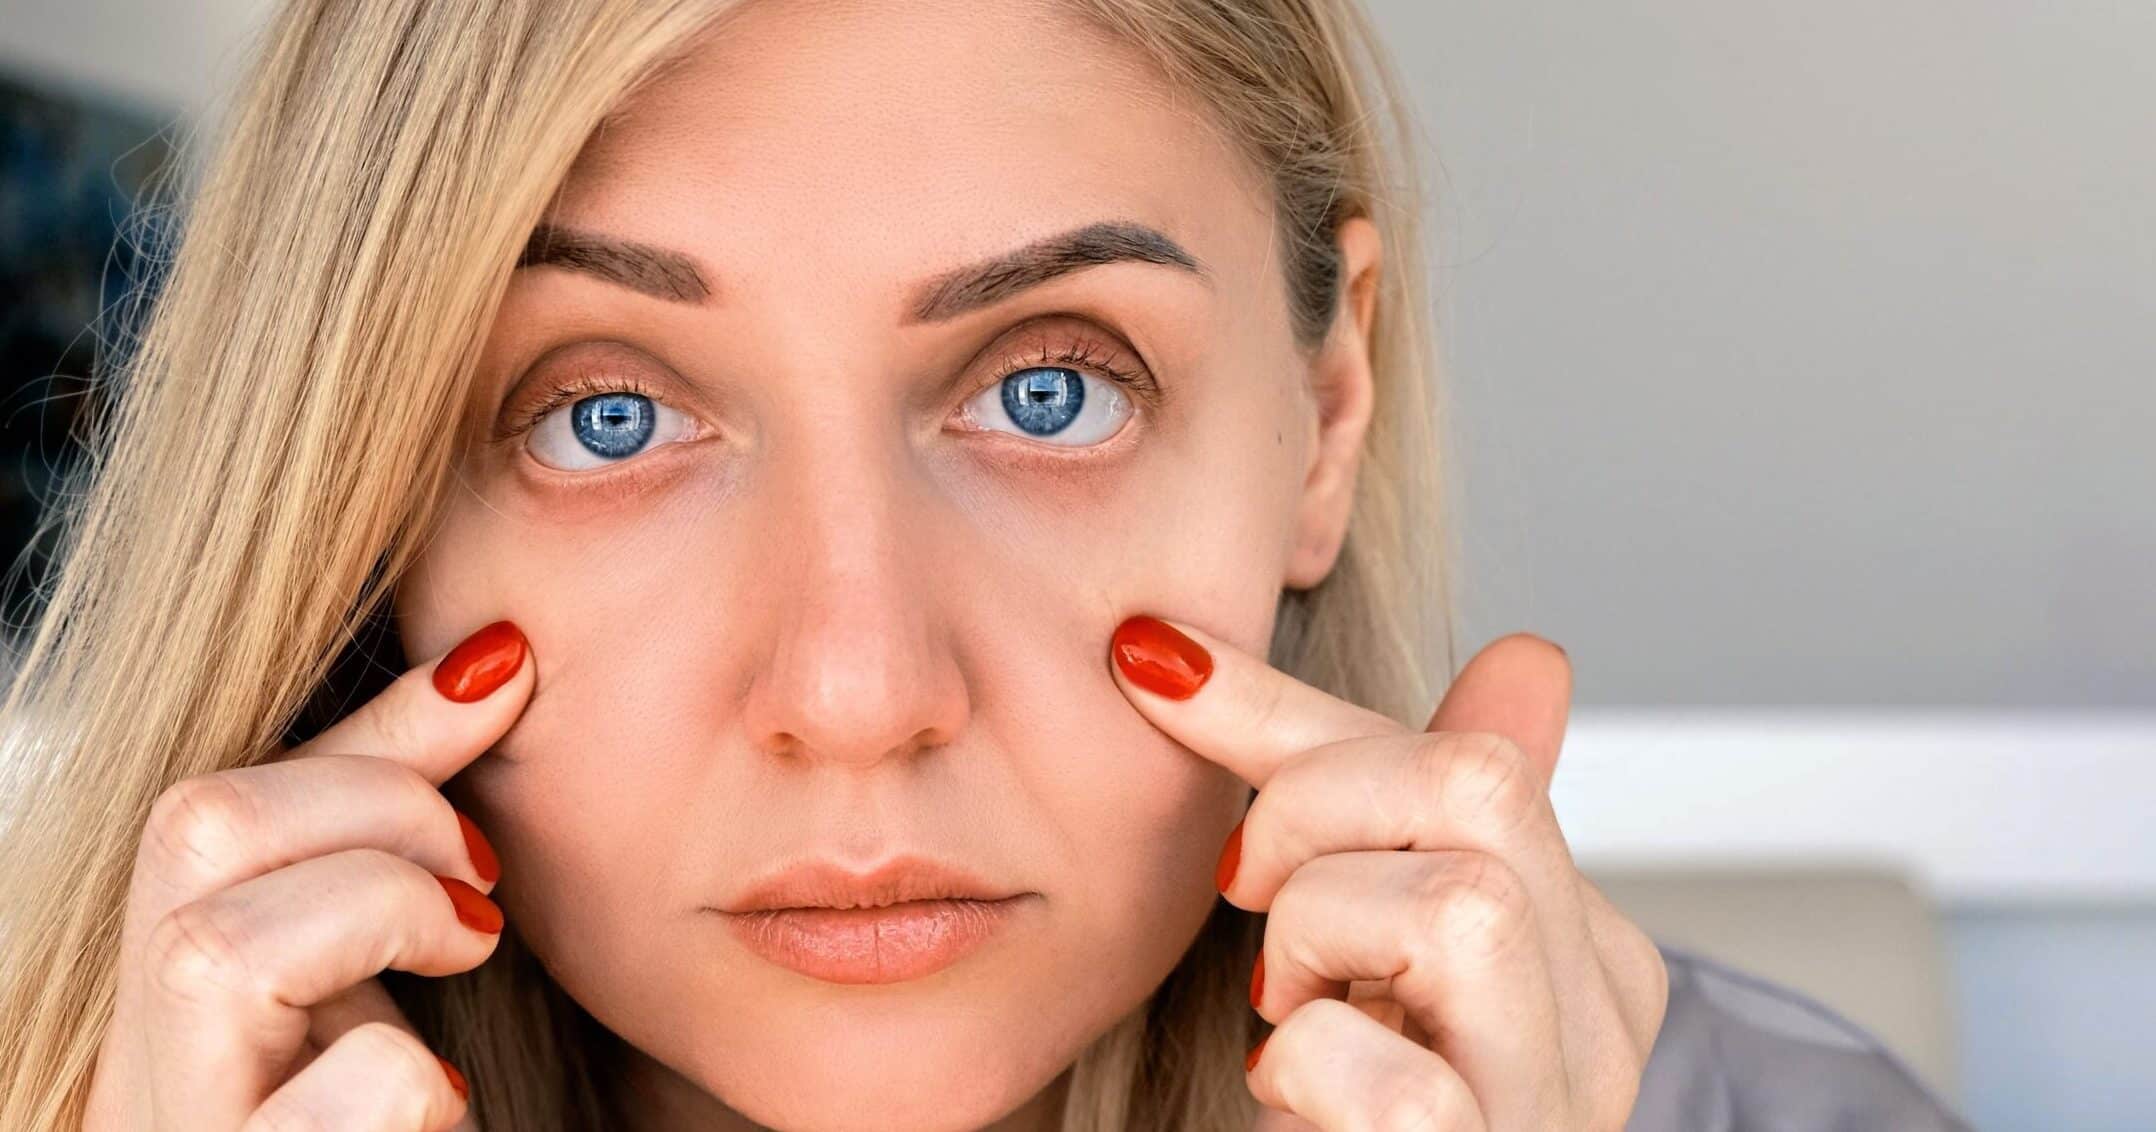 The 9 Most Common Causes of Under Eye Bags & Dark Circles